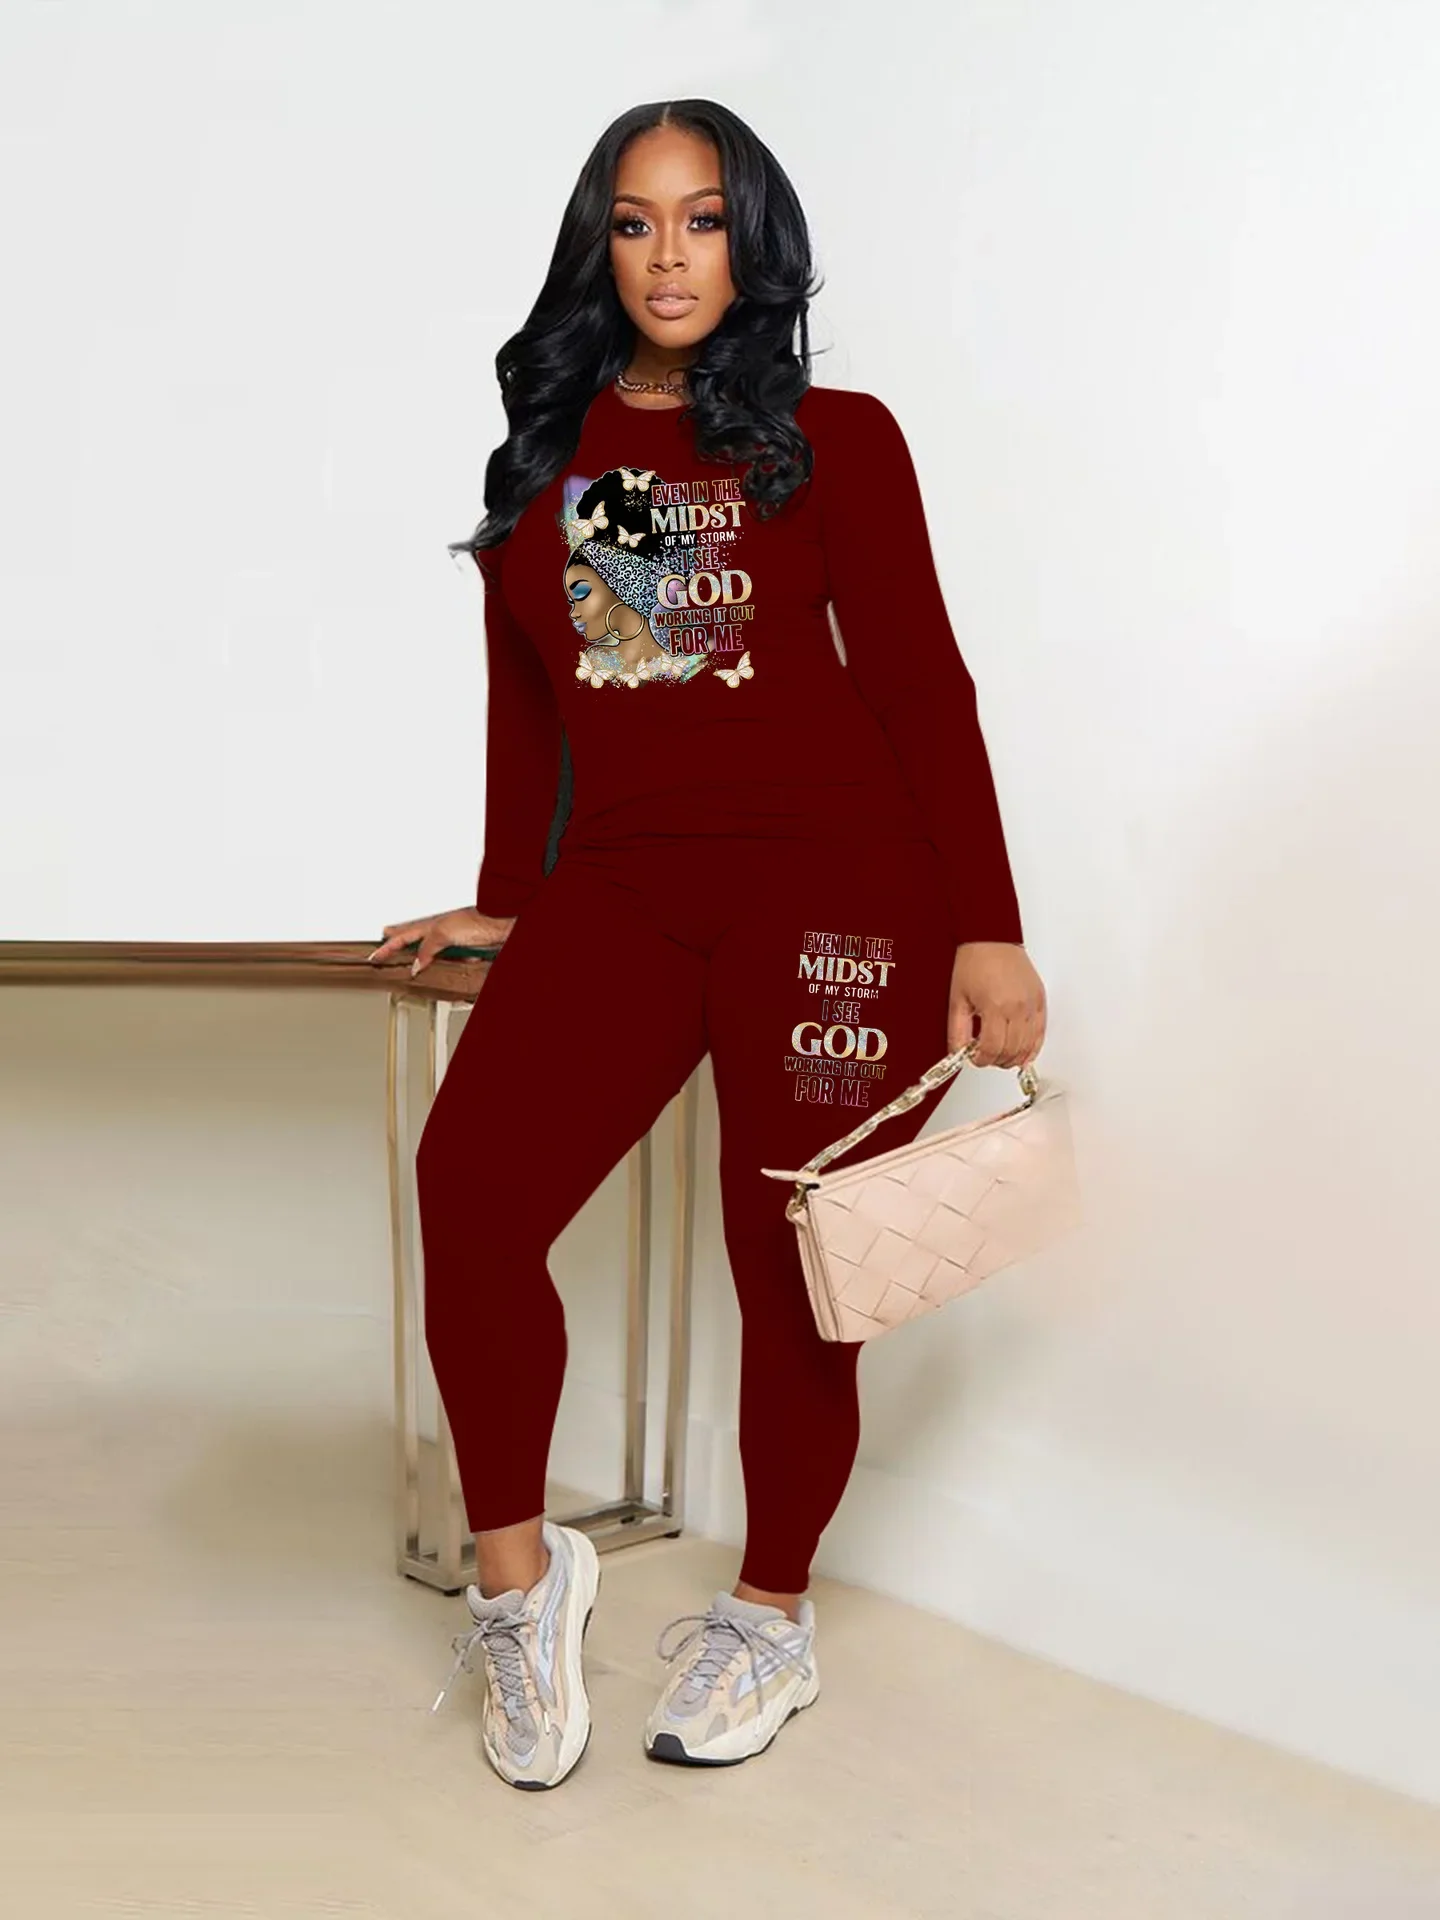 Women's Suit Autumn Fashion Athleisure Long Sleeve Top and Trousers Two Piece Set Printing O-Neck 2 Piece Sets Womens Outfits cargo pants high waist women s jeans 2022 trend baggy denim trousers ripped printing straight wide leg streetwear jean woman y2k